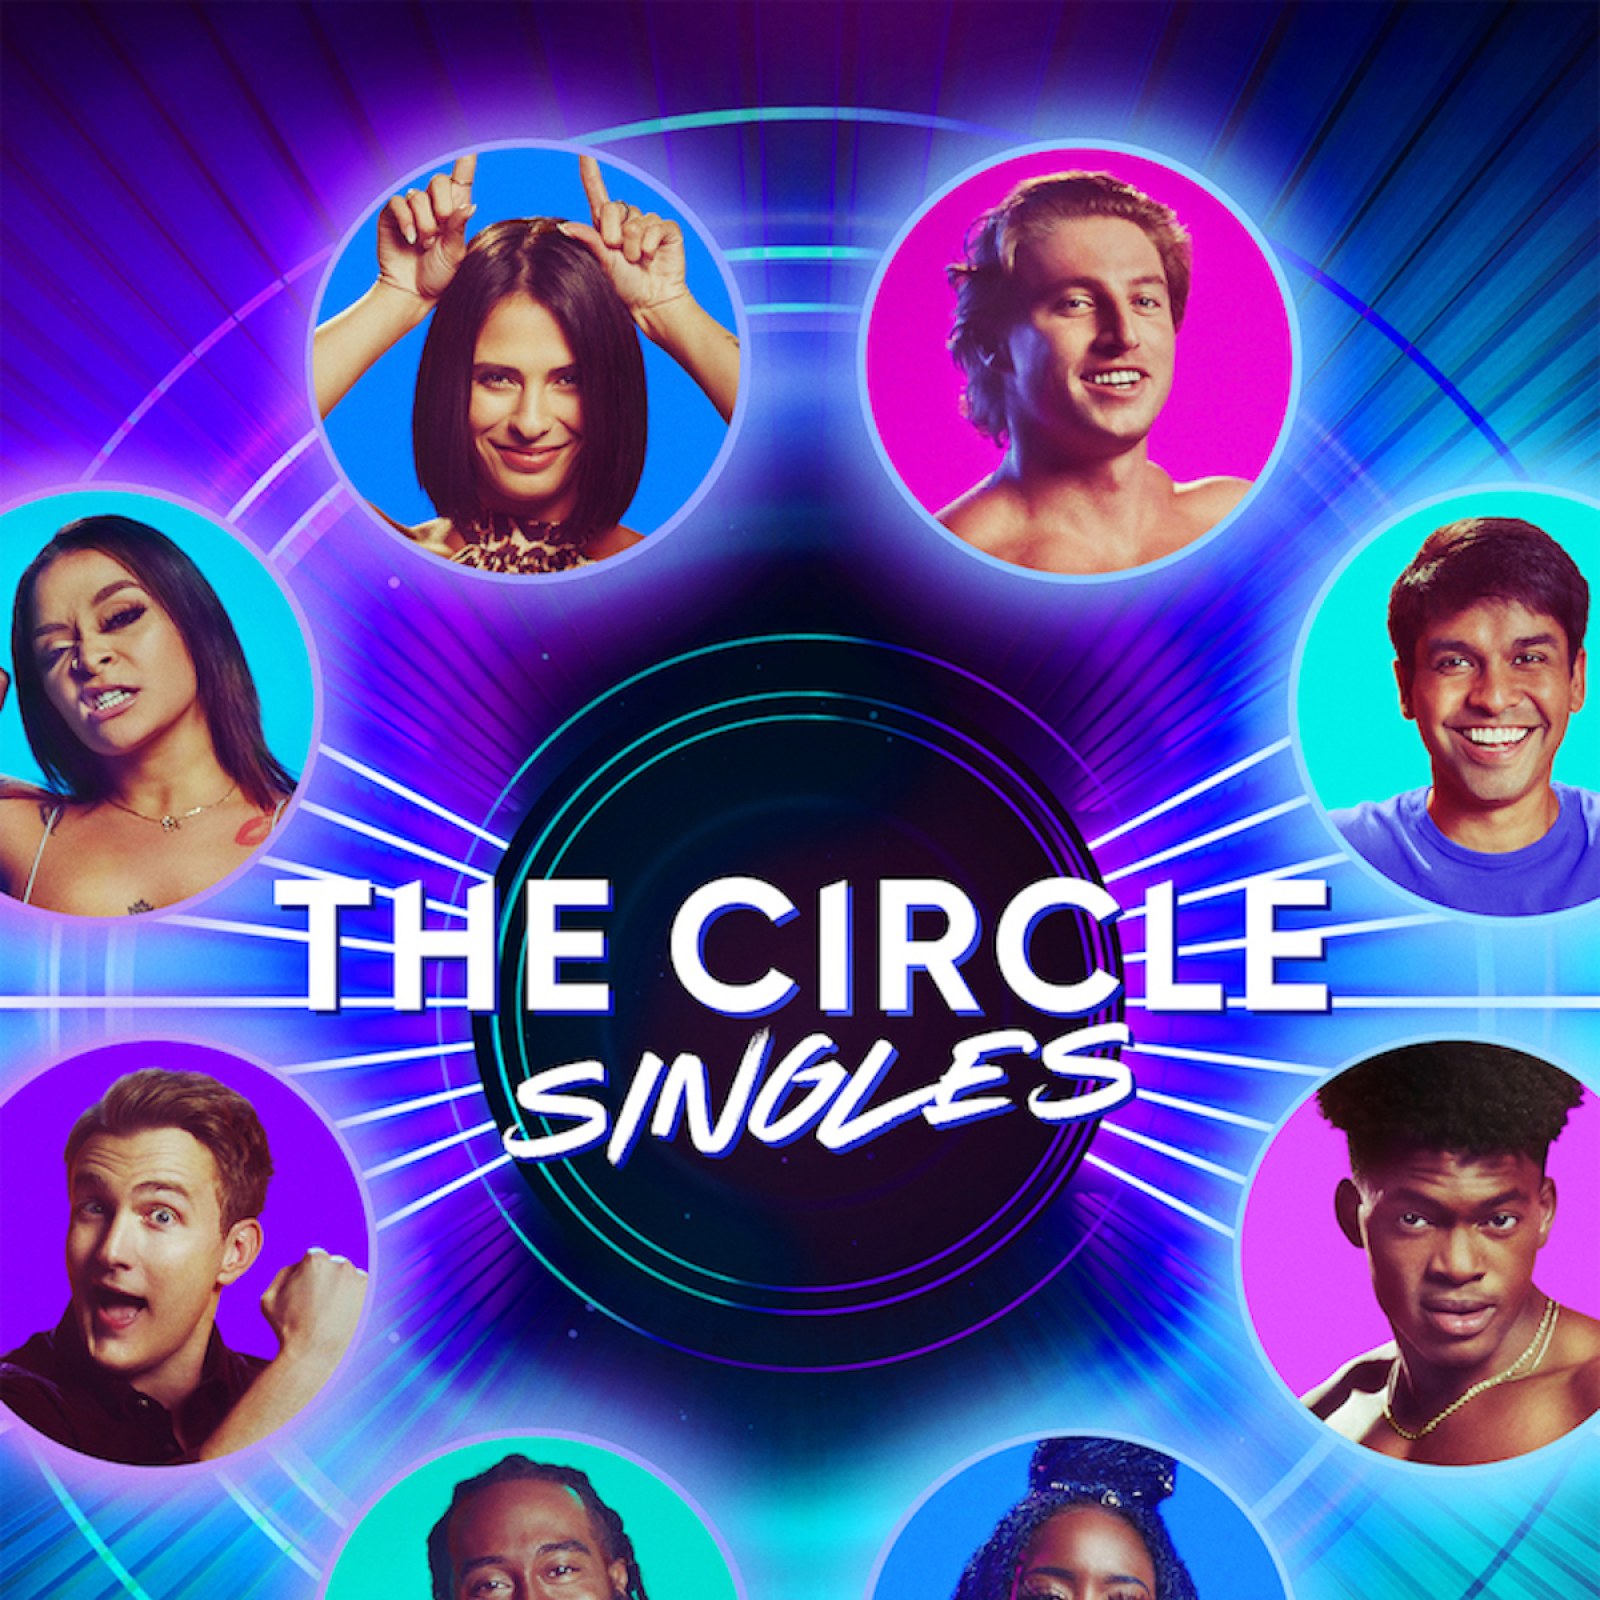 Meet the new players of The Circle season 5 — including a Big Brother alum